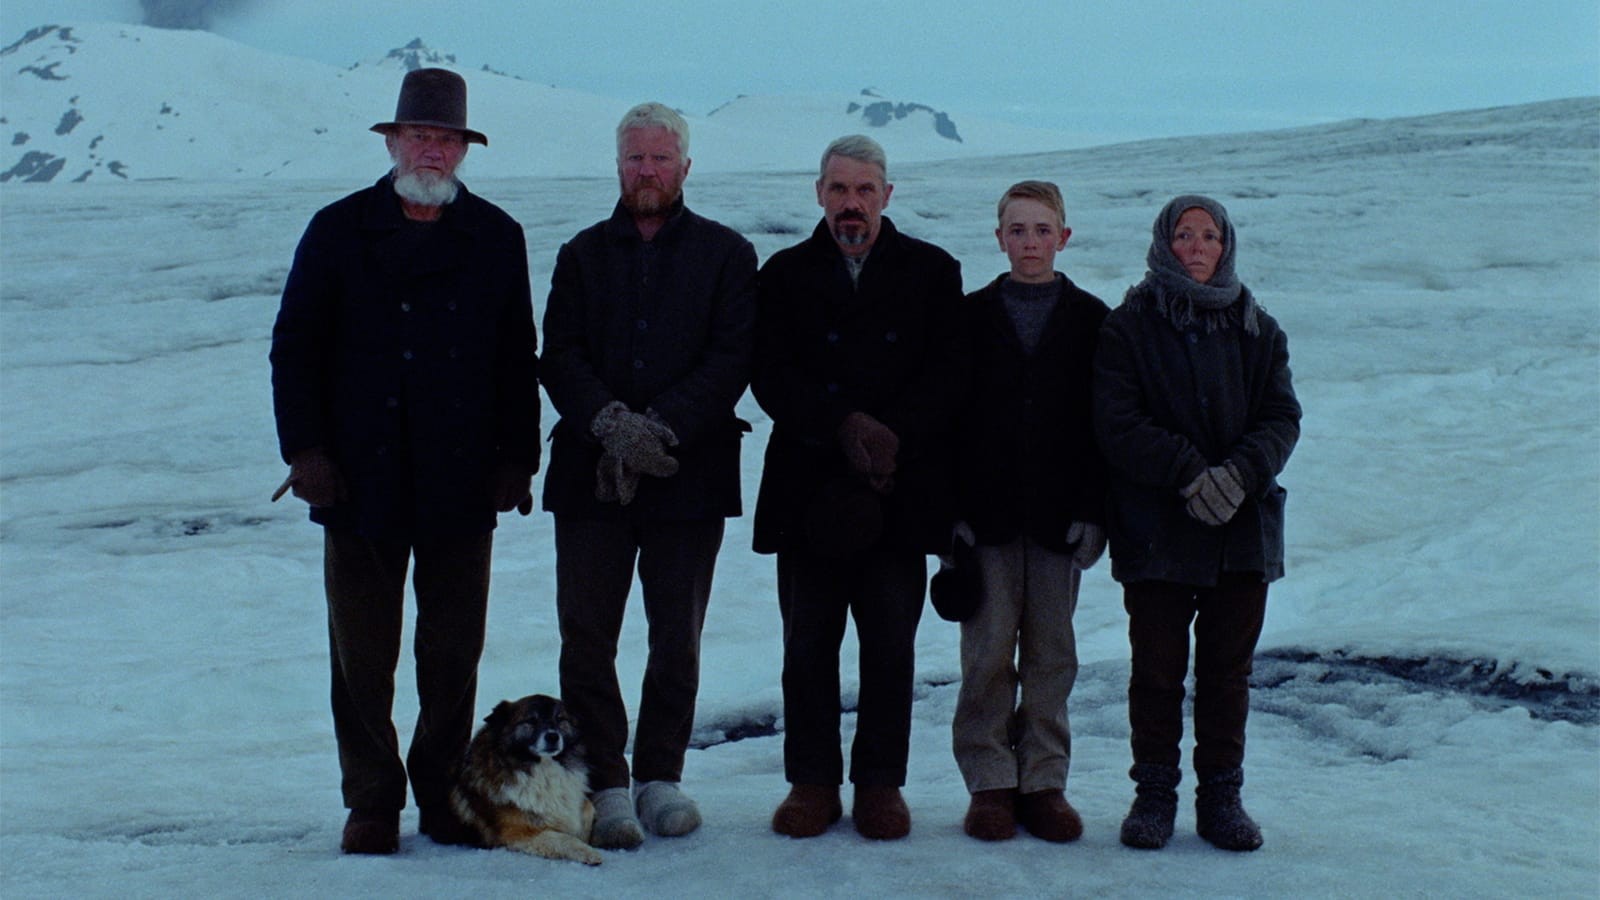 3 men, 1 child, 1 woman, all dressed in early 20th Century garb and a dog stand on a desolate ice field with mountains in the background.